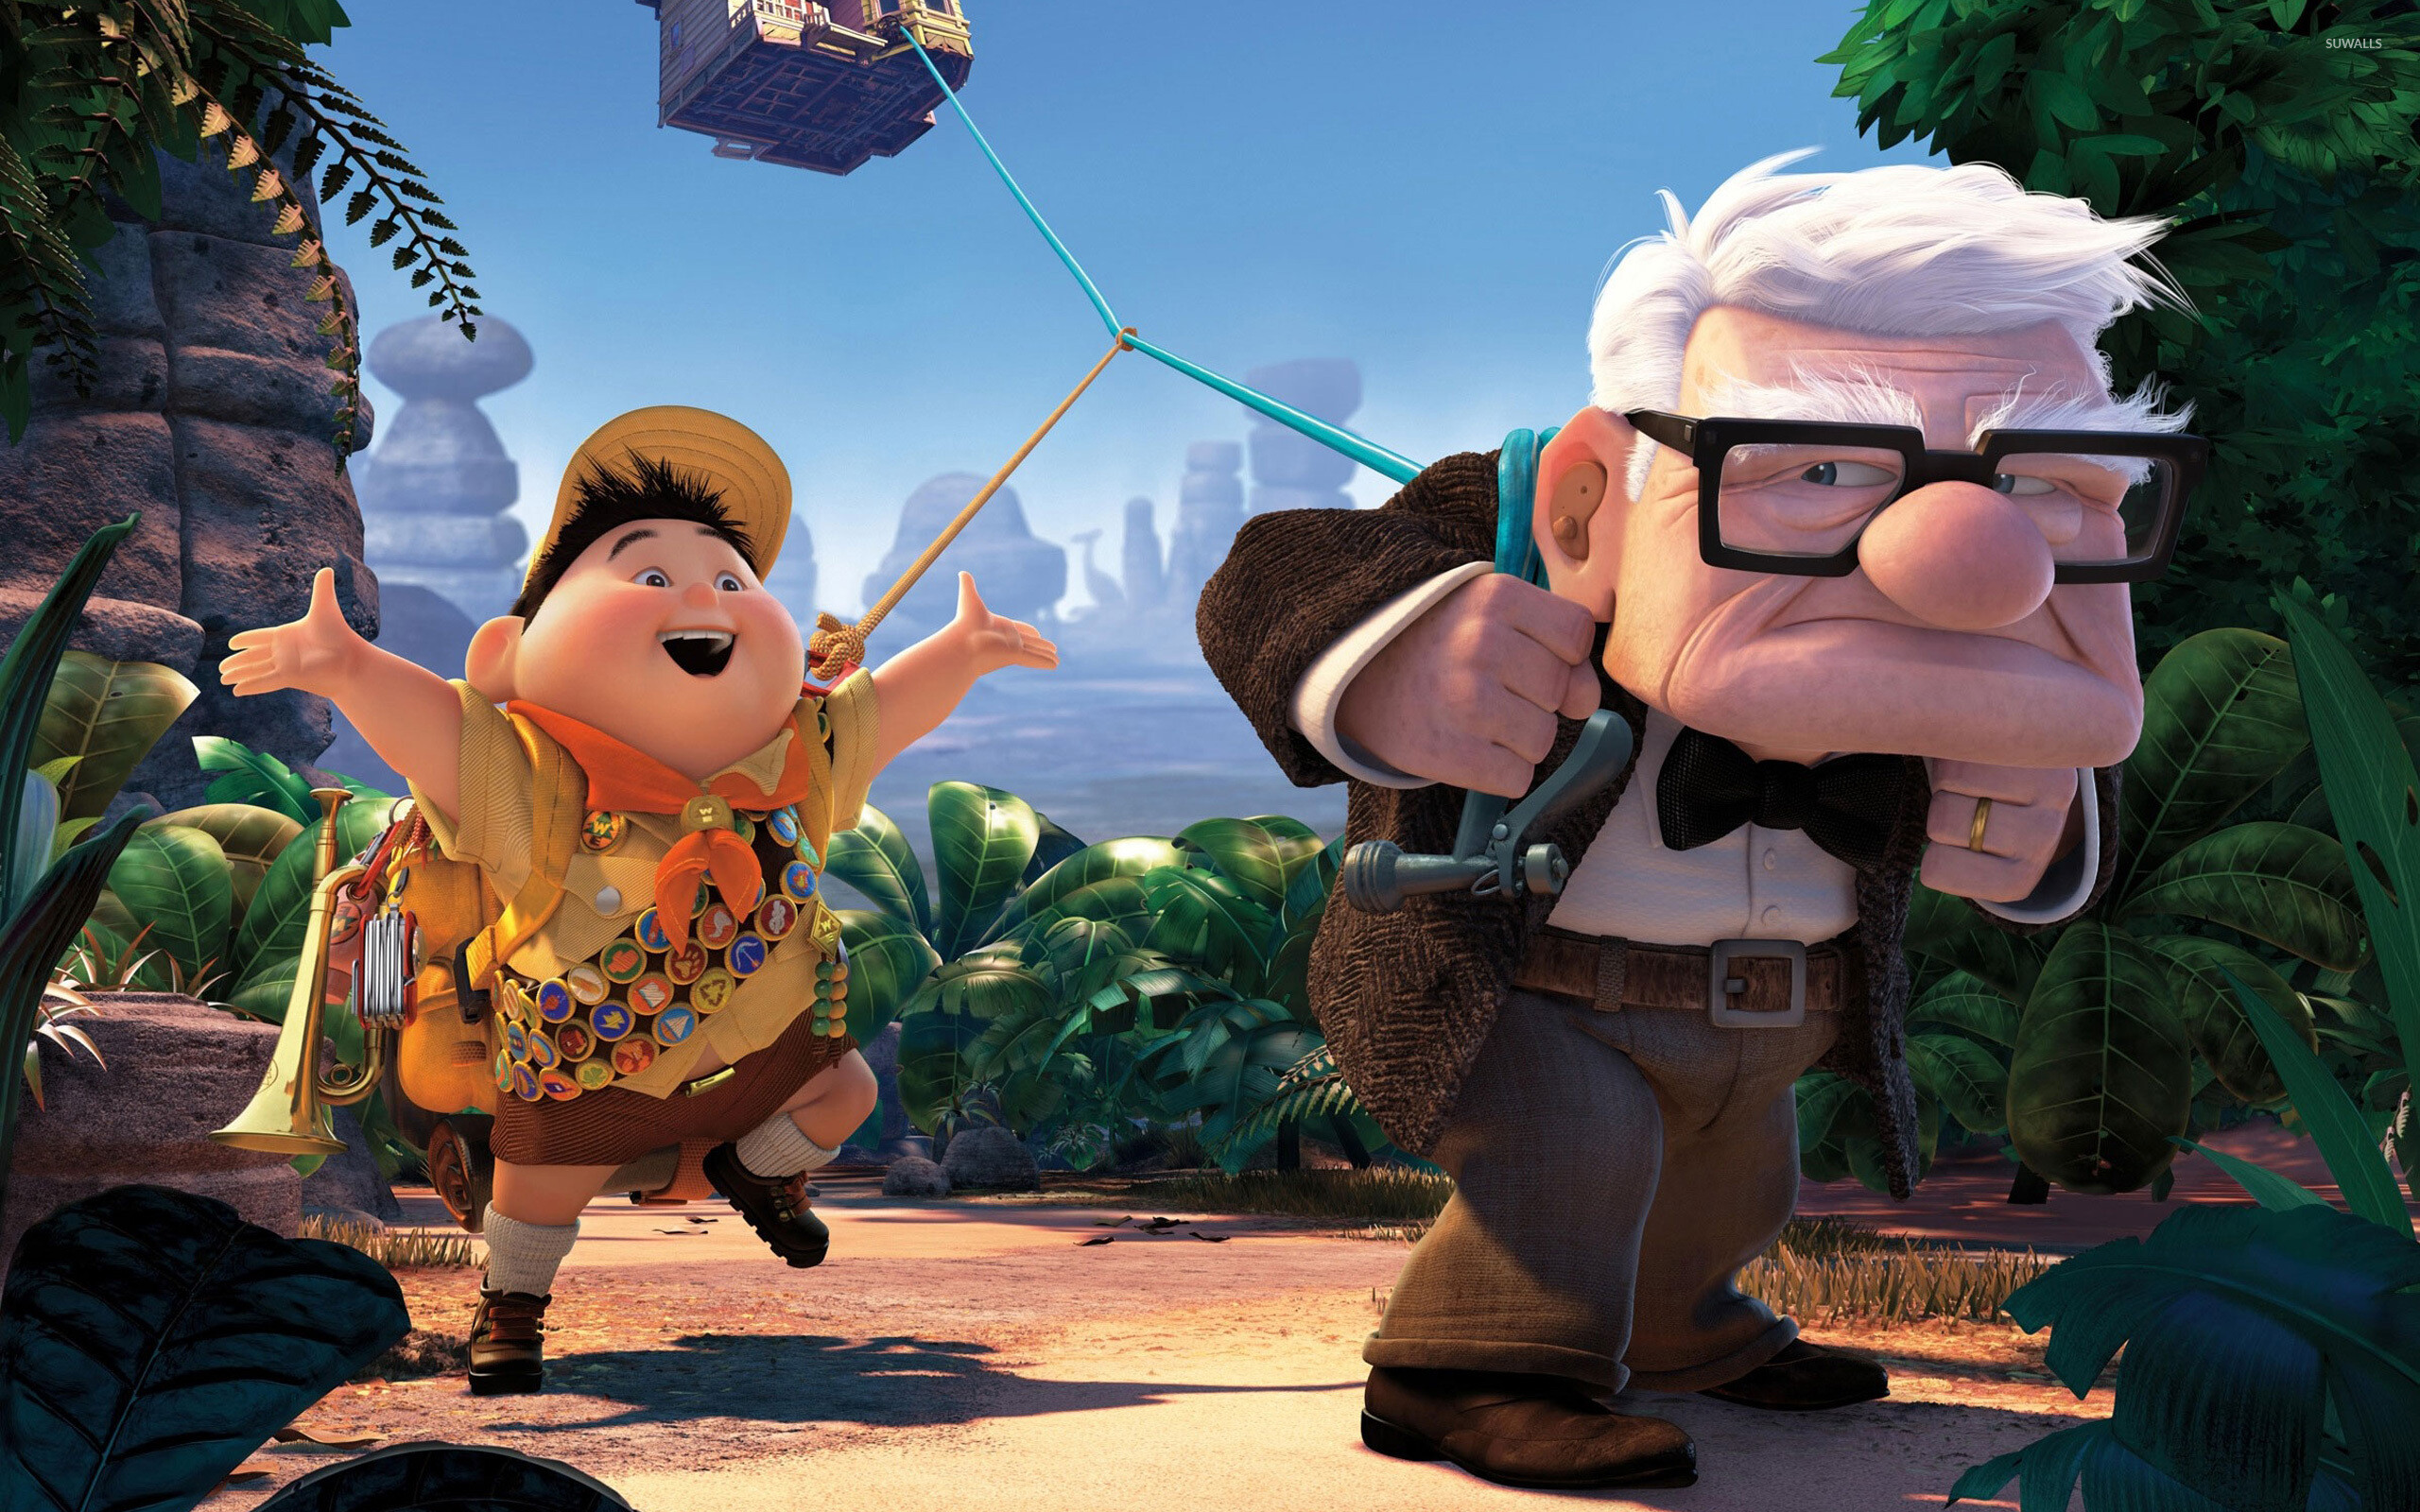 Up (Cartoon): An American computer-animated film, Centers on an elderly widower named Carl and a young Wilderness Explorer named Russell. 2560x1600 HD Background.